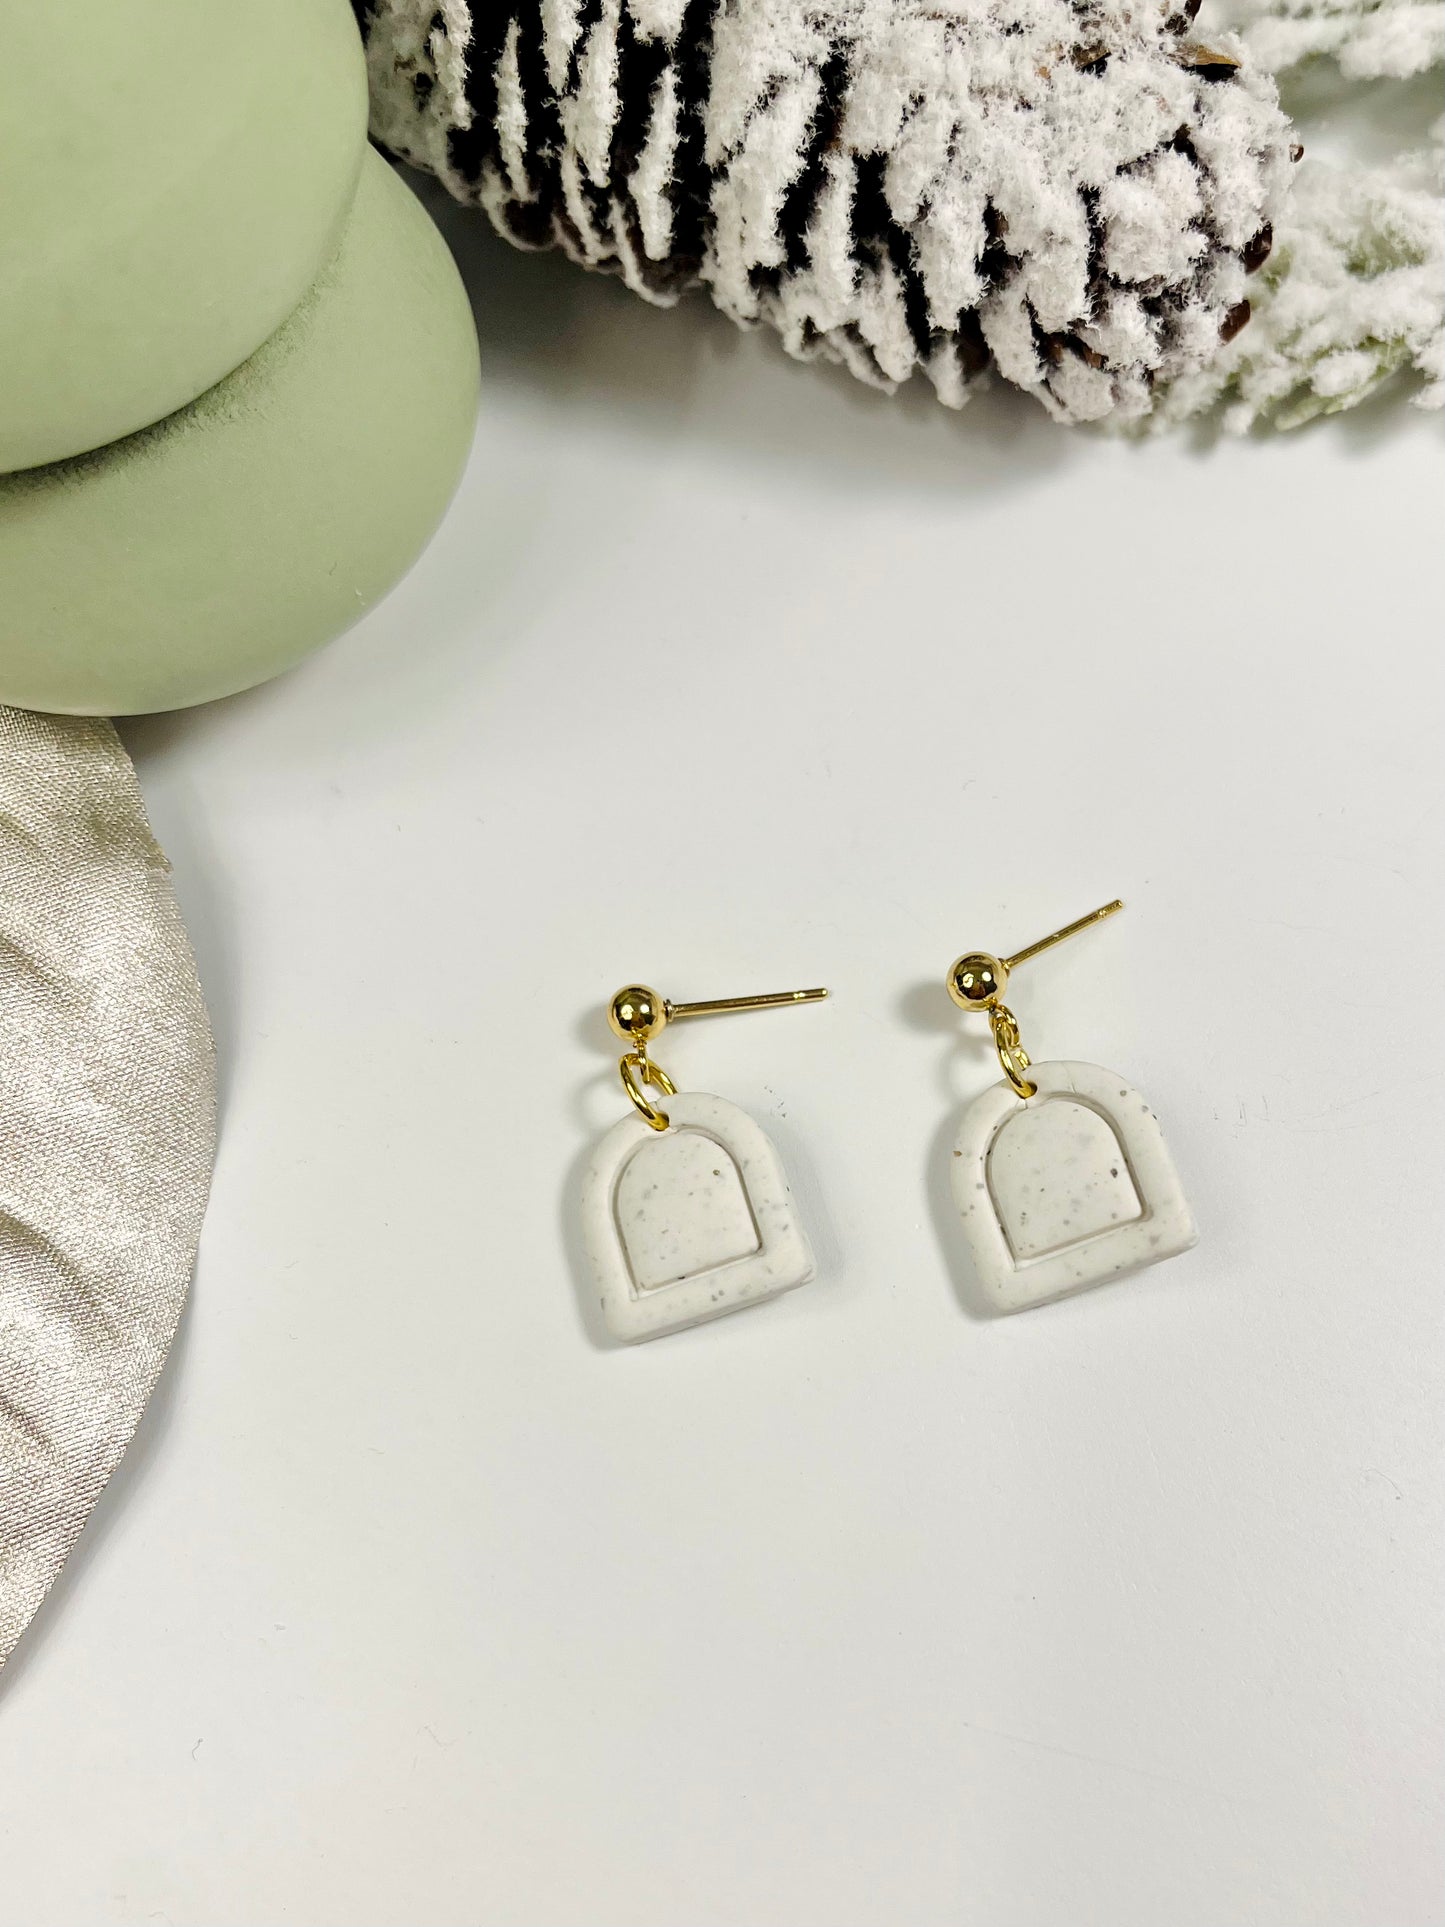 c.Borderline collection, lightweight earrings, everyday wear, holiday jewelry